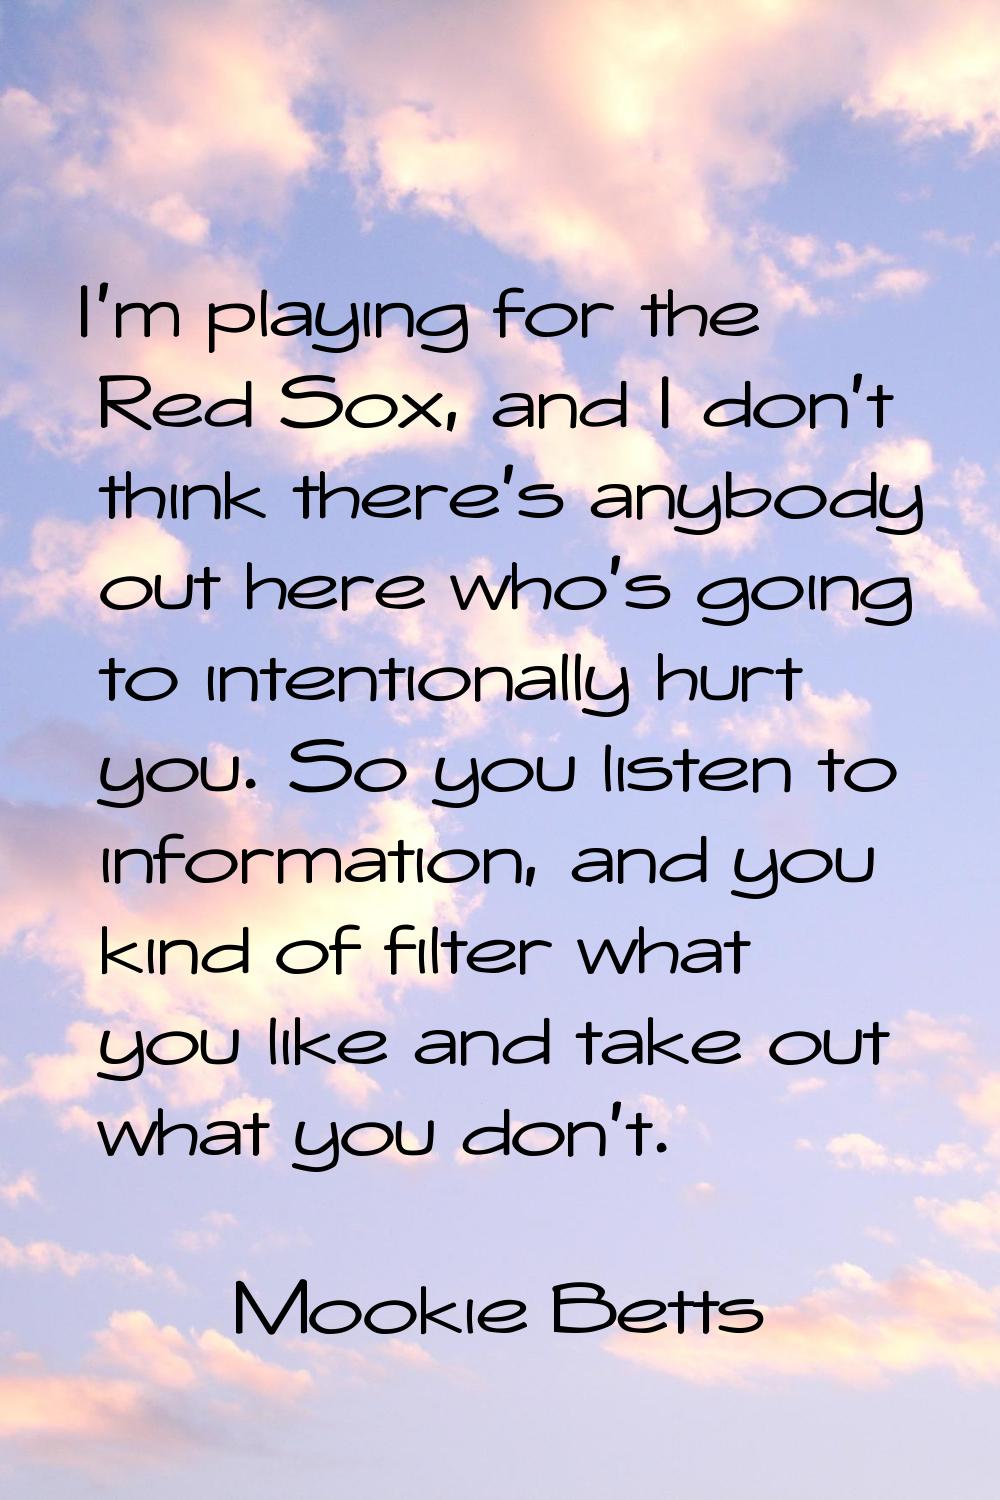 I'm playing for the Red Sox, and I don't think there's anybody out here who's going to intentionall